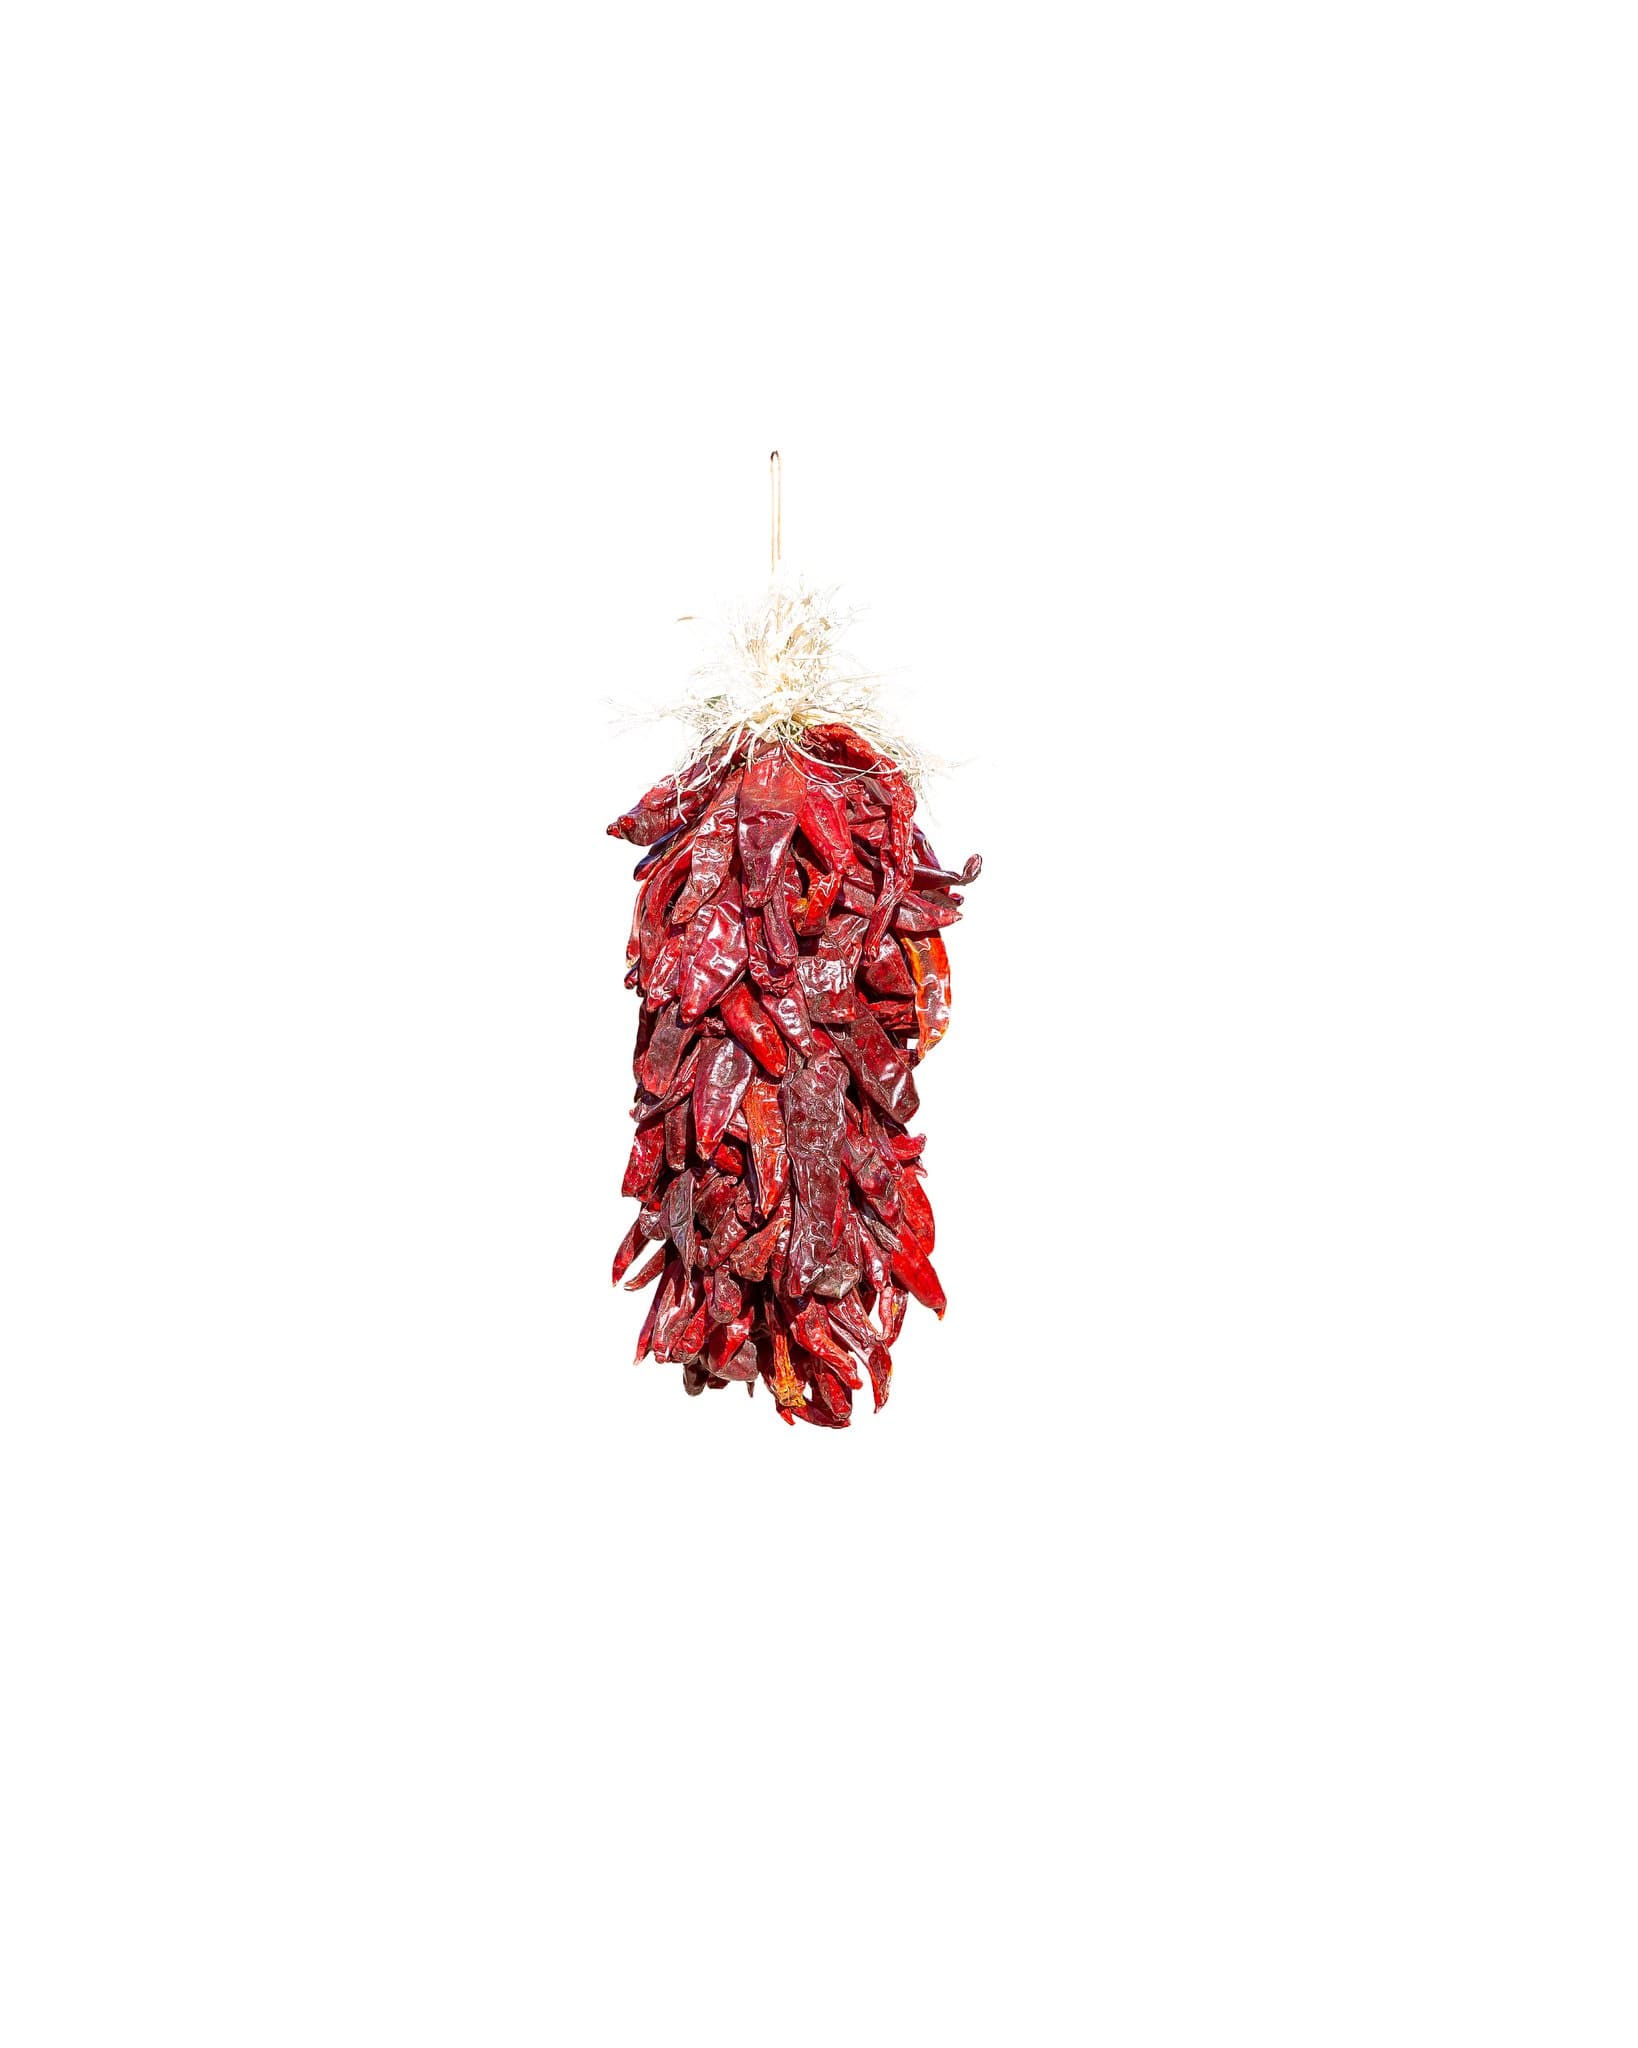 A bundle of dried Traditional Sandia Ristras hung by a string against a white background.